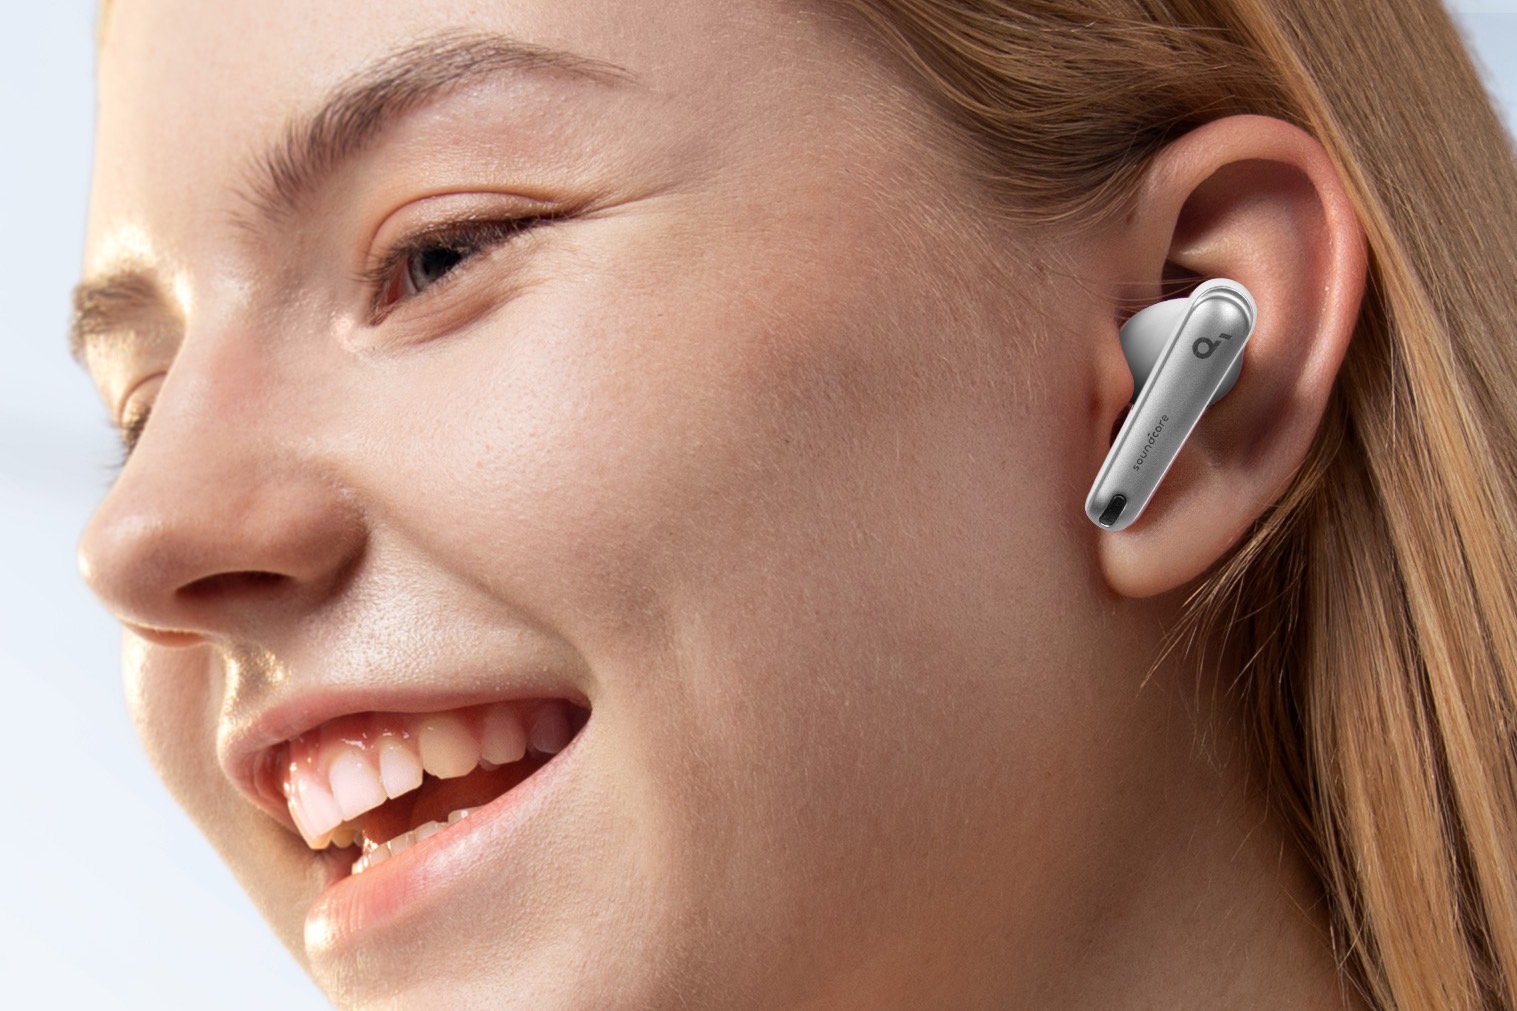 Soundcore's new wireless buds block up to 98% of external noise